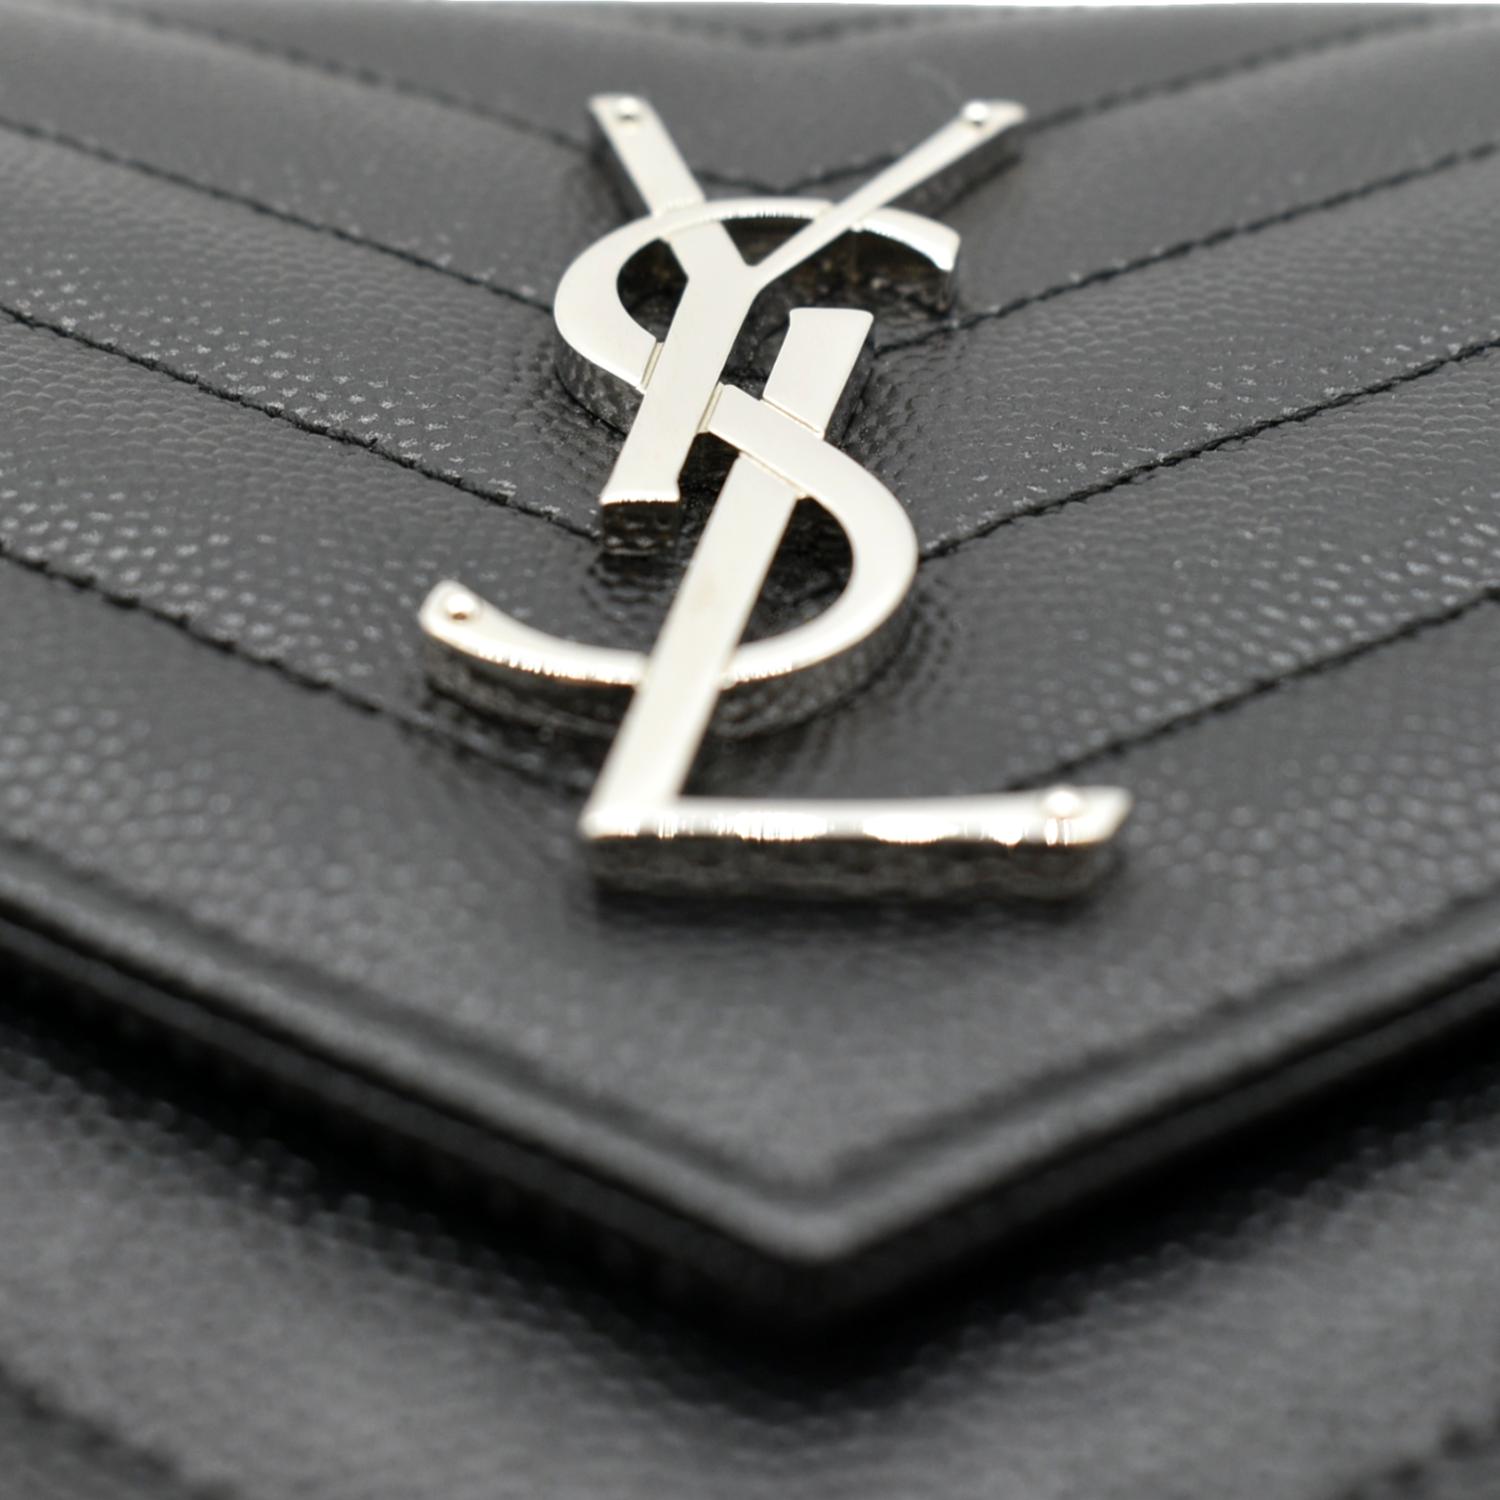 Yves Saint Laurent, Bags, Authentic Ysl Leather Long Wallet On Chain  Black